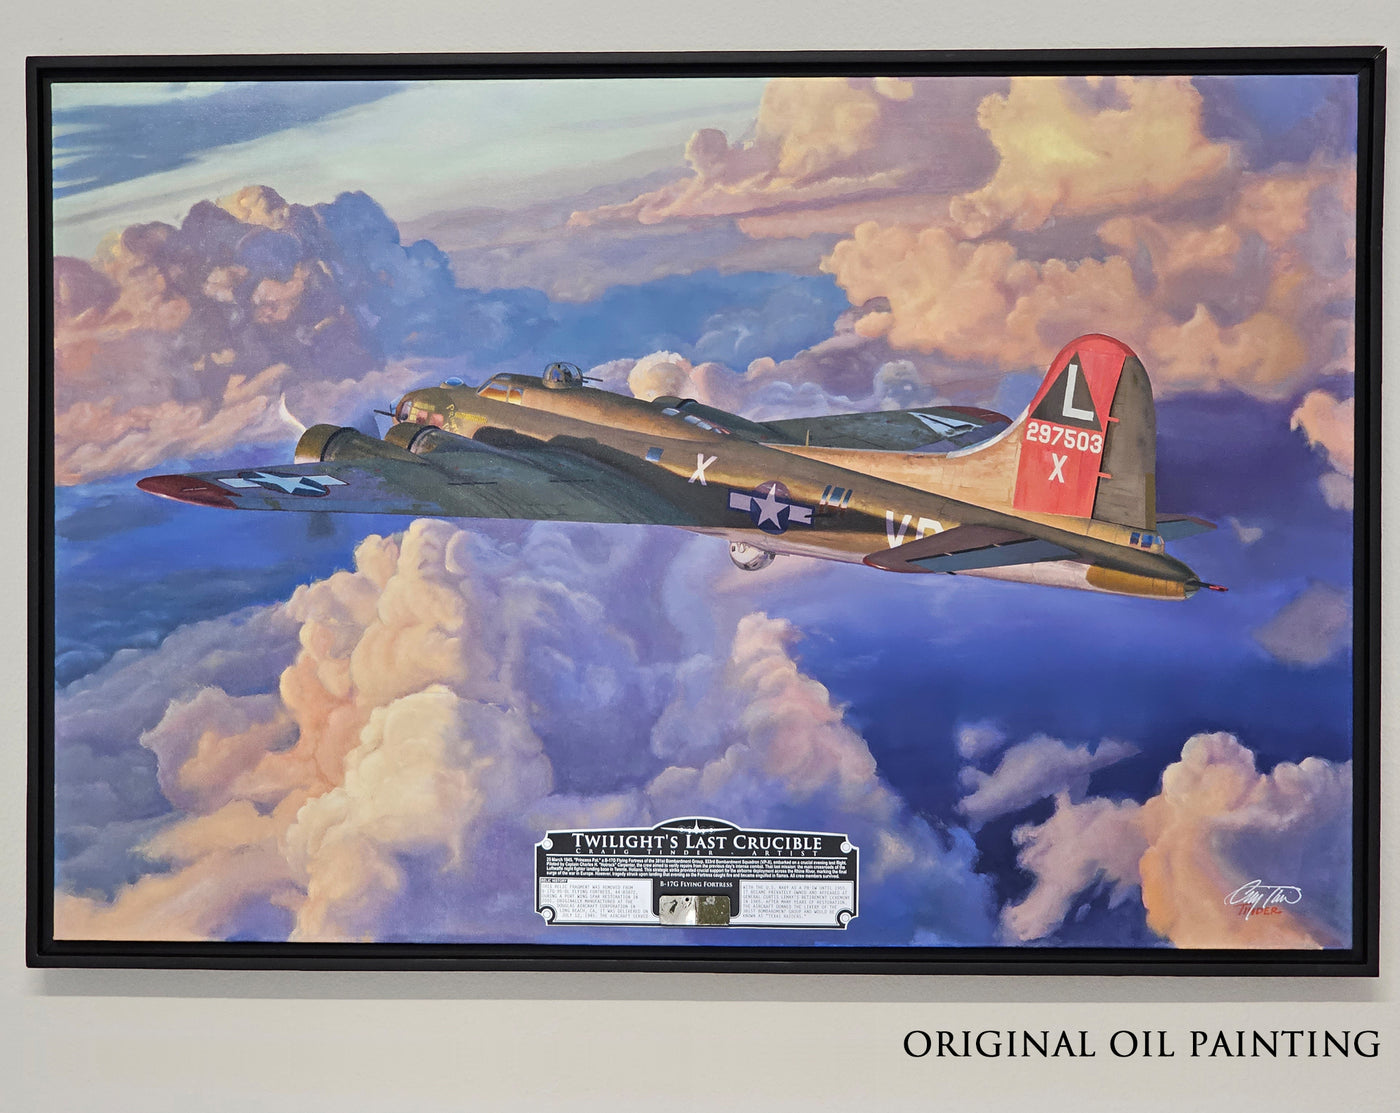 Original oil painting of Art print "Twilight's Last Crucible" by Artist Craig Tinder, showing a B-17 flying through the clouds at sunset.